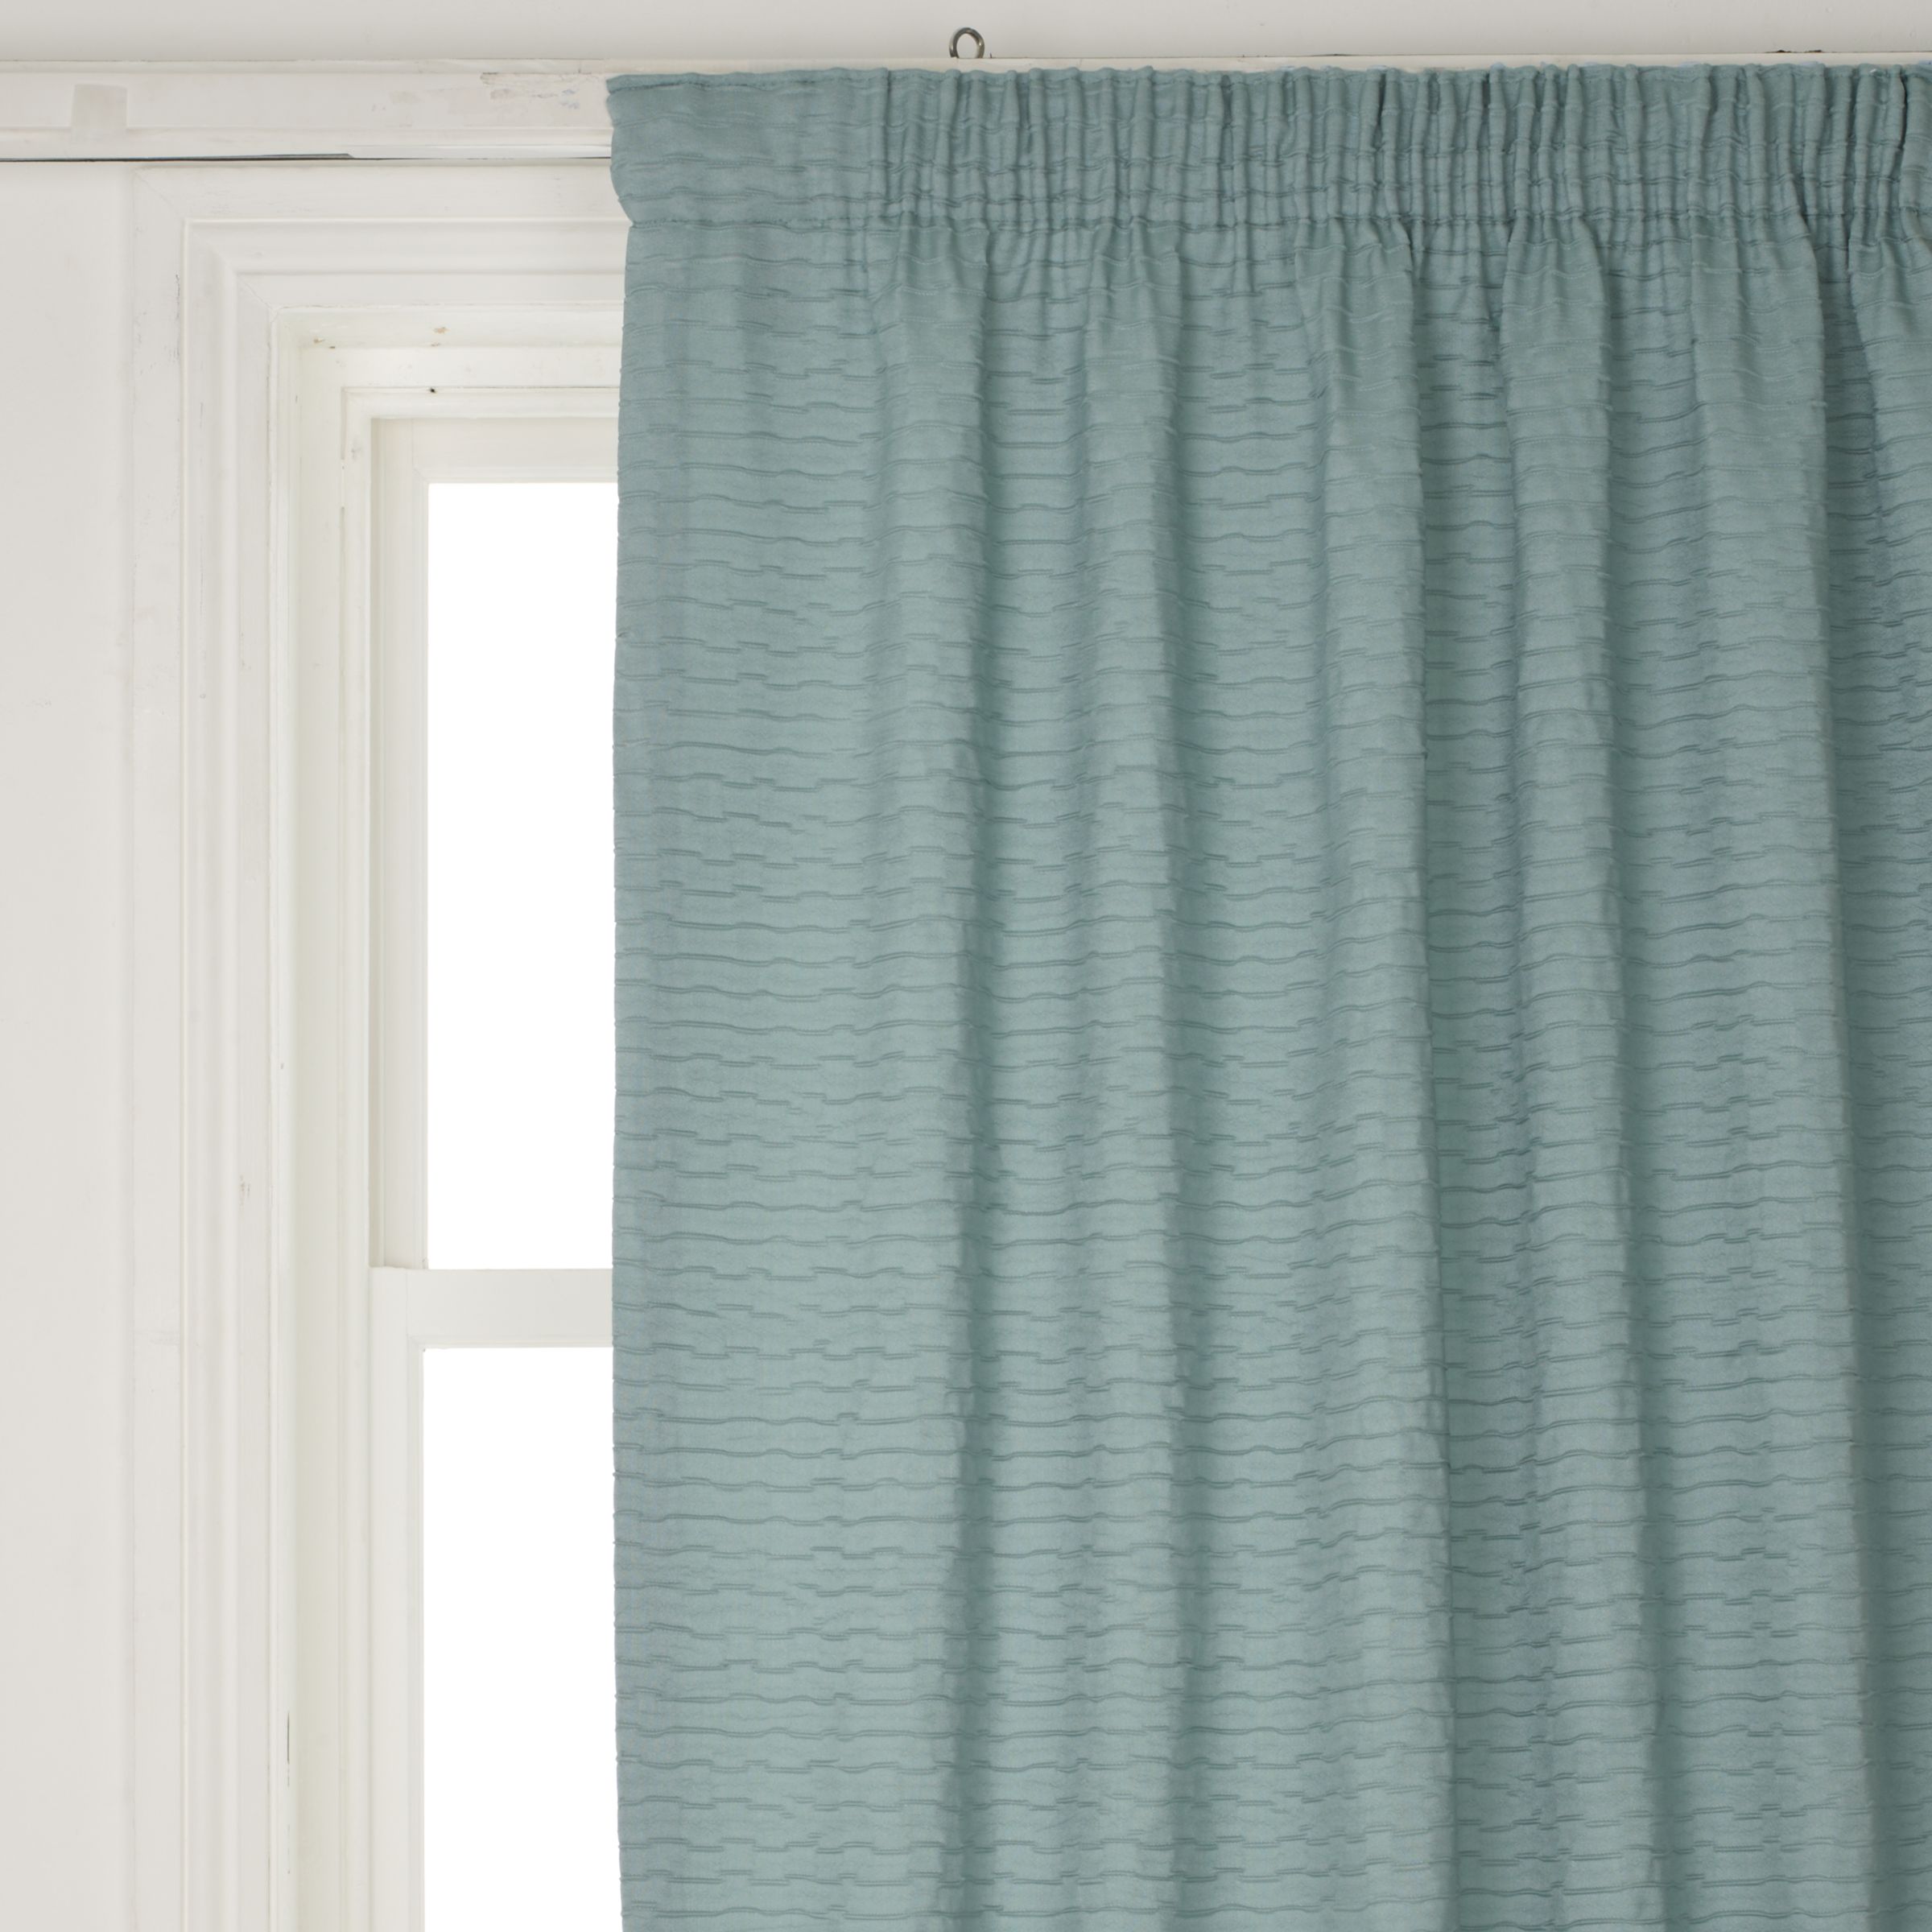 Riva Pencil Pleat Curtains, Soft Teal